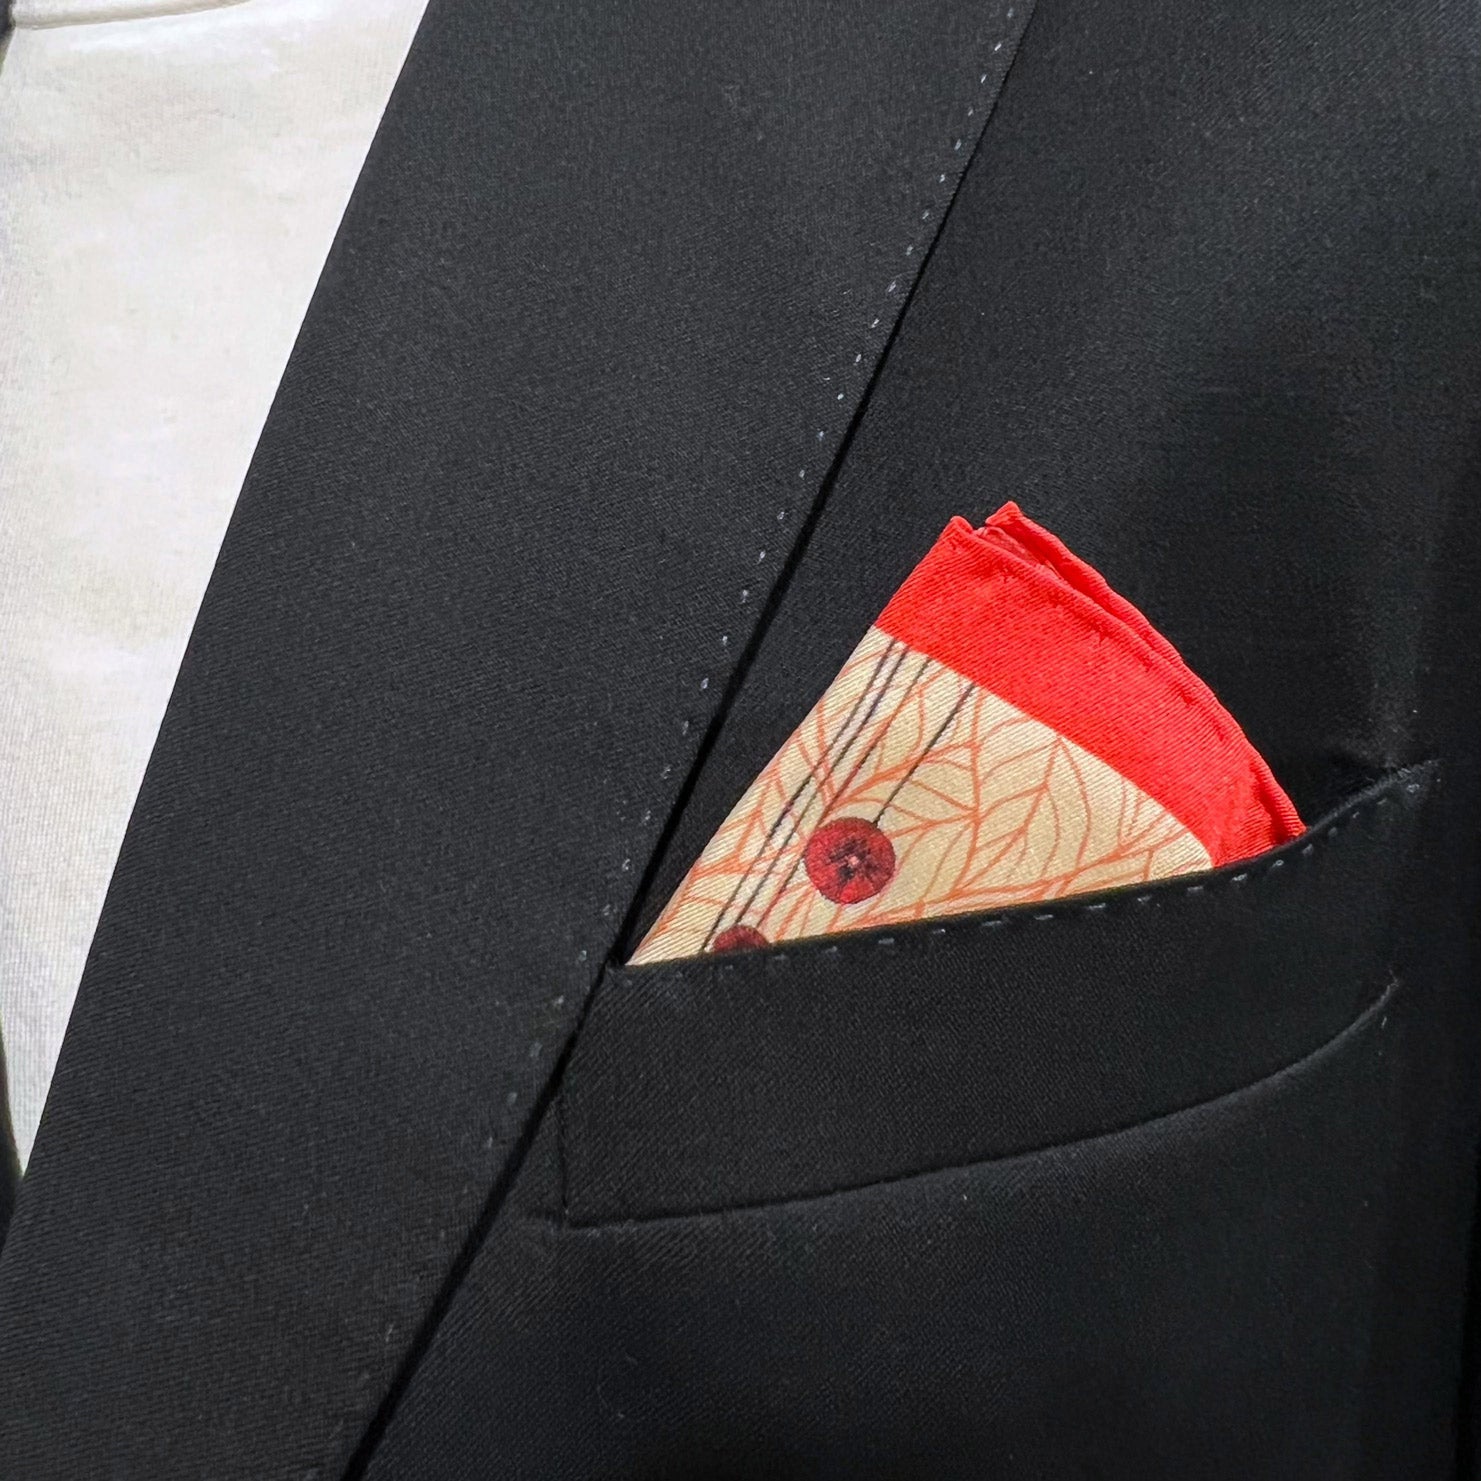 Silk square handkerchief with stylised red poppy flowers motif. Placed in a jacket breast pocket.